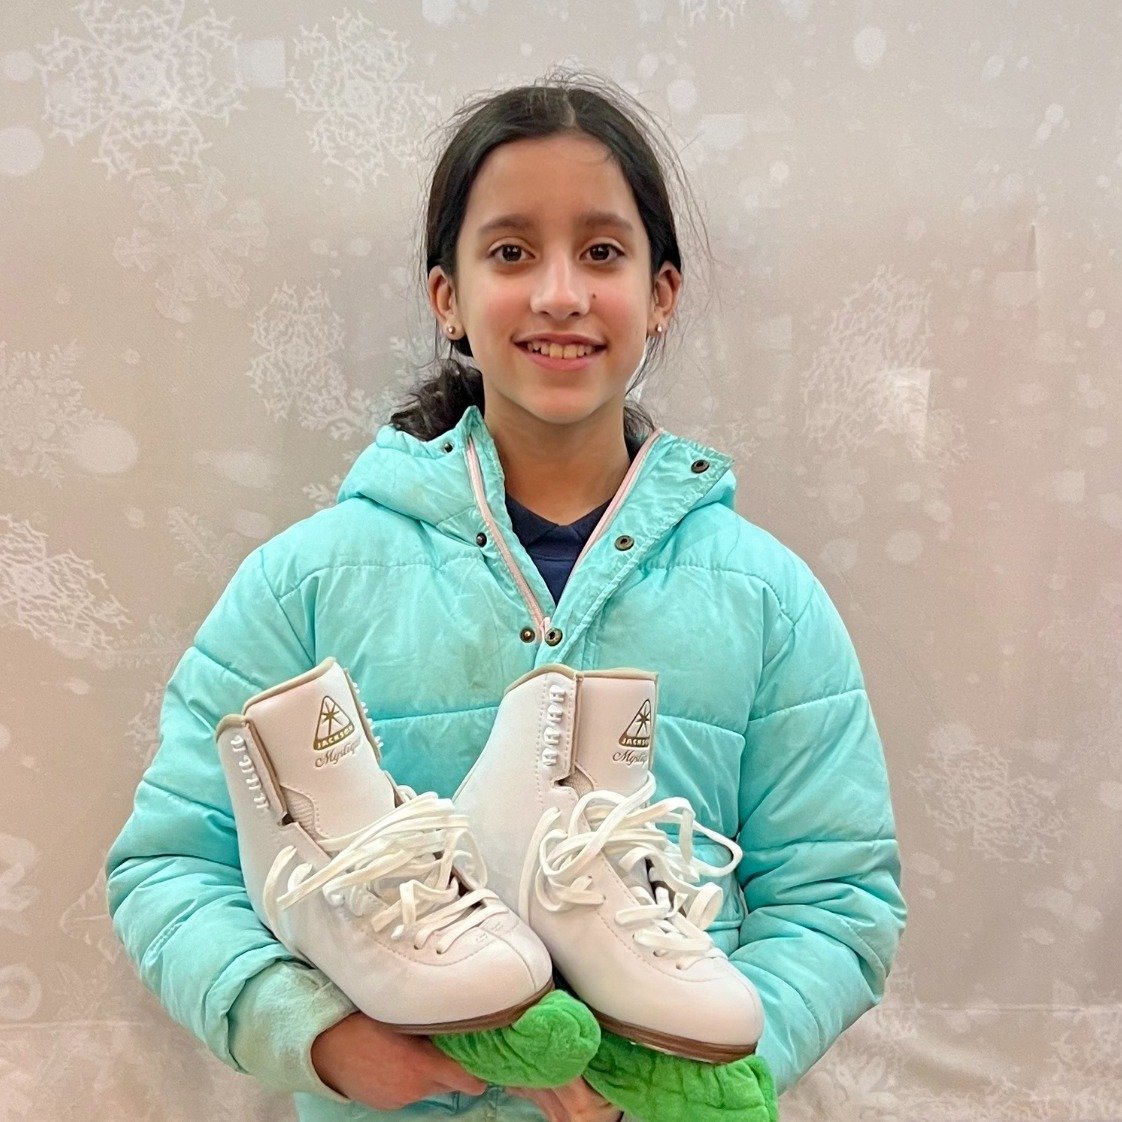 It's Monday and Molly's New Skate Day! 🎉

Money's on Mystiques for marvelous moves on ice 💜

...that's all the M's we've got 😂

Congrats to Molly and her new @jackson.ultima skates! We made quite the update from her beginner set to something with 